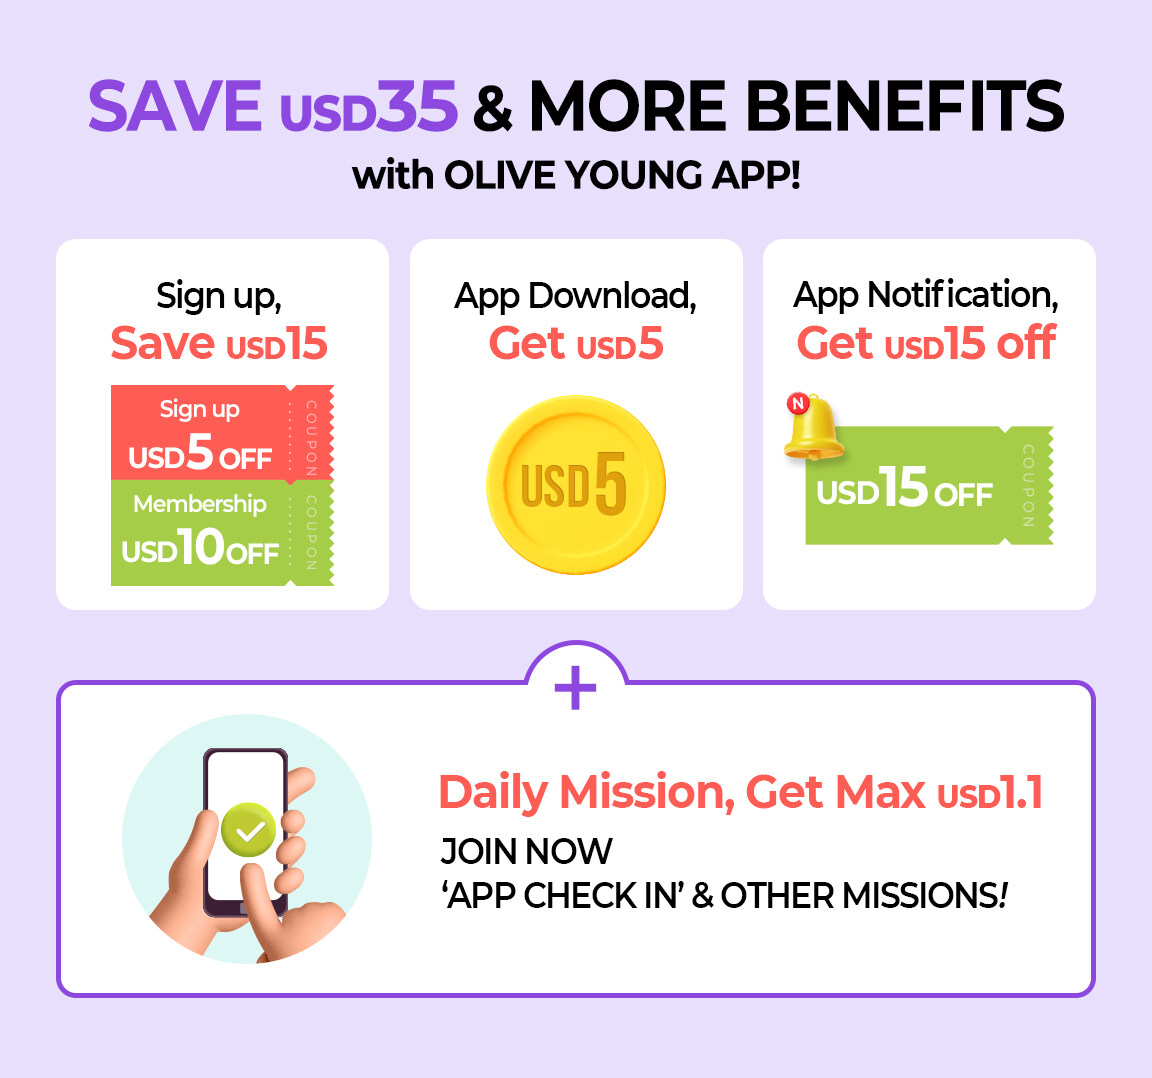 Sign up, Save USD15( Sign up USD5 OFF COUPON, Membership USD10 OFF) App Download, Get USD5 App Notification, Get USD15 off COUPON Daily Mission, Get Max USD1.1 Join Now 'App Check in' & other missions!